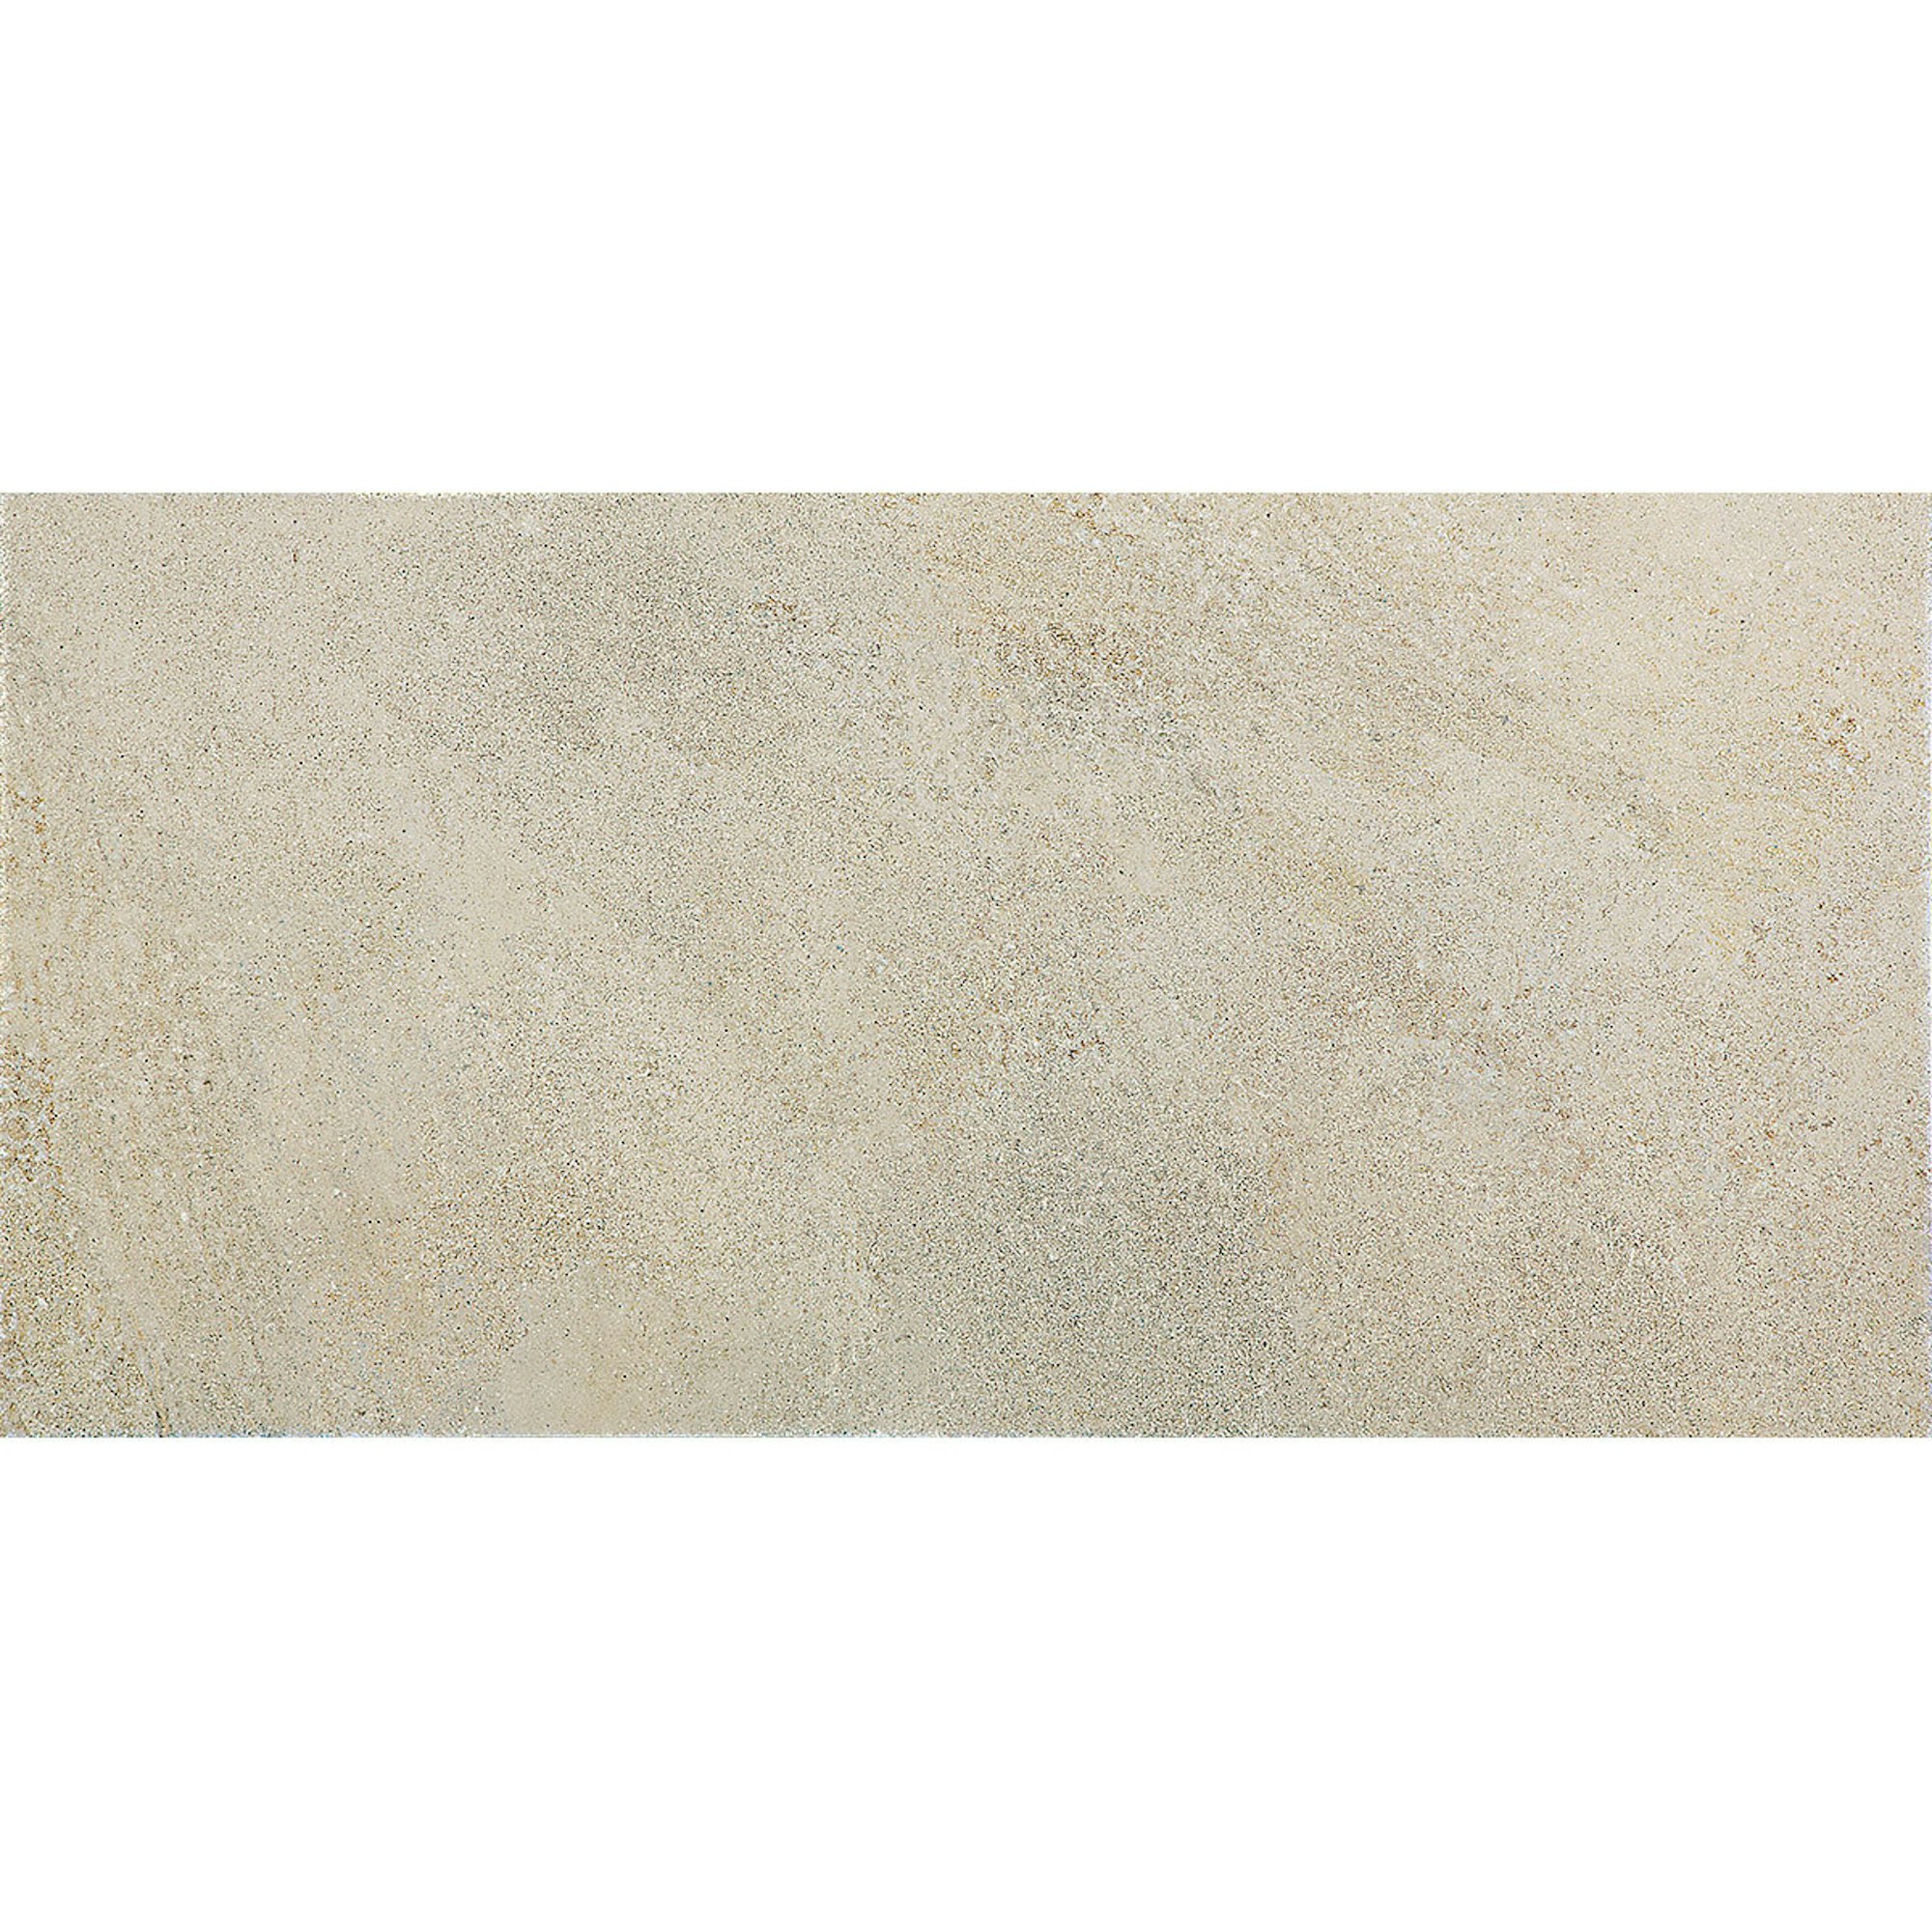 Castle Bianco 1200x600mm Clearance